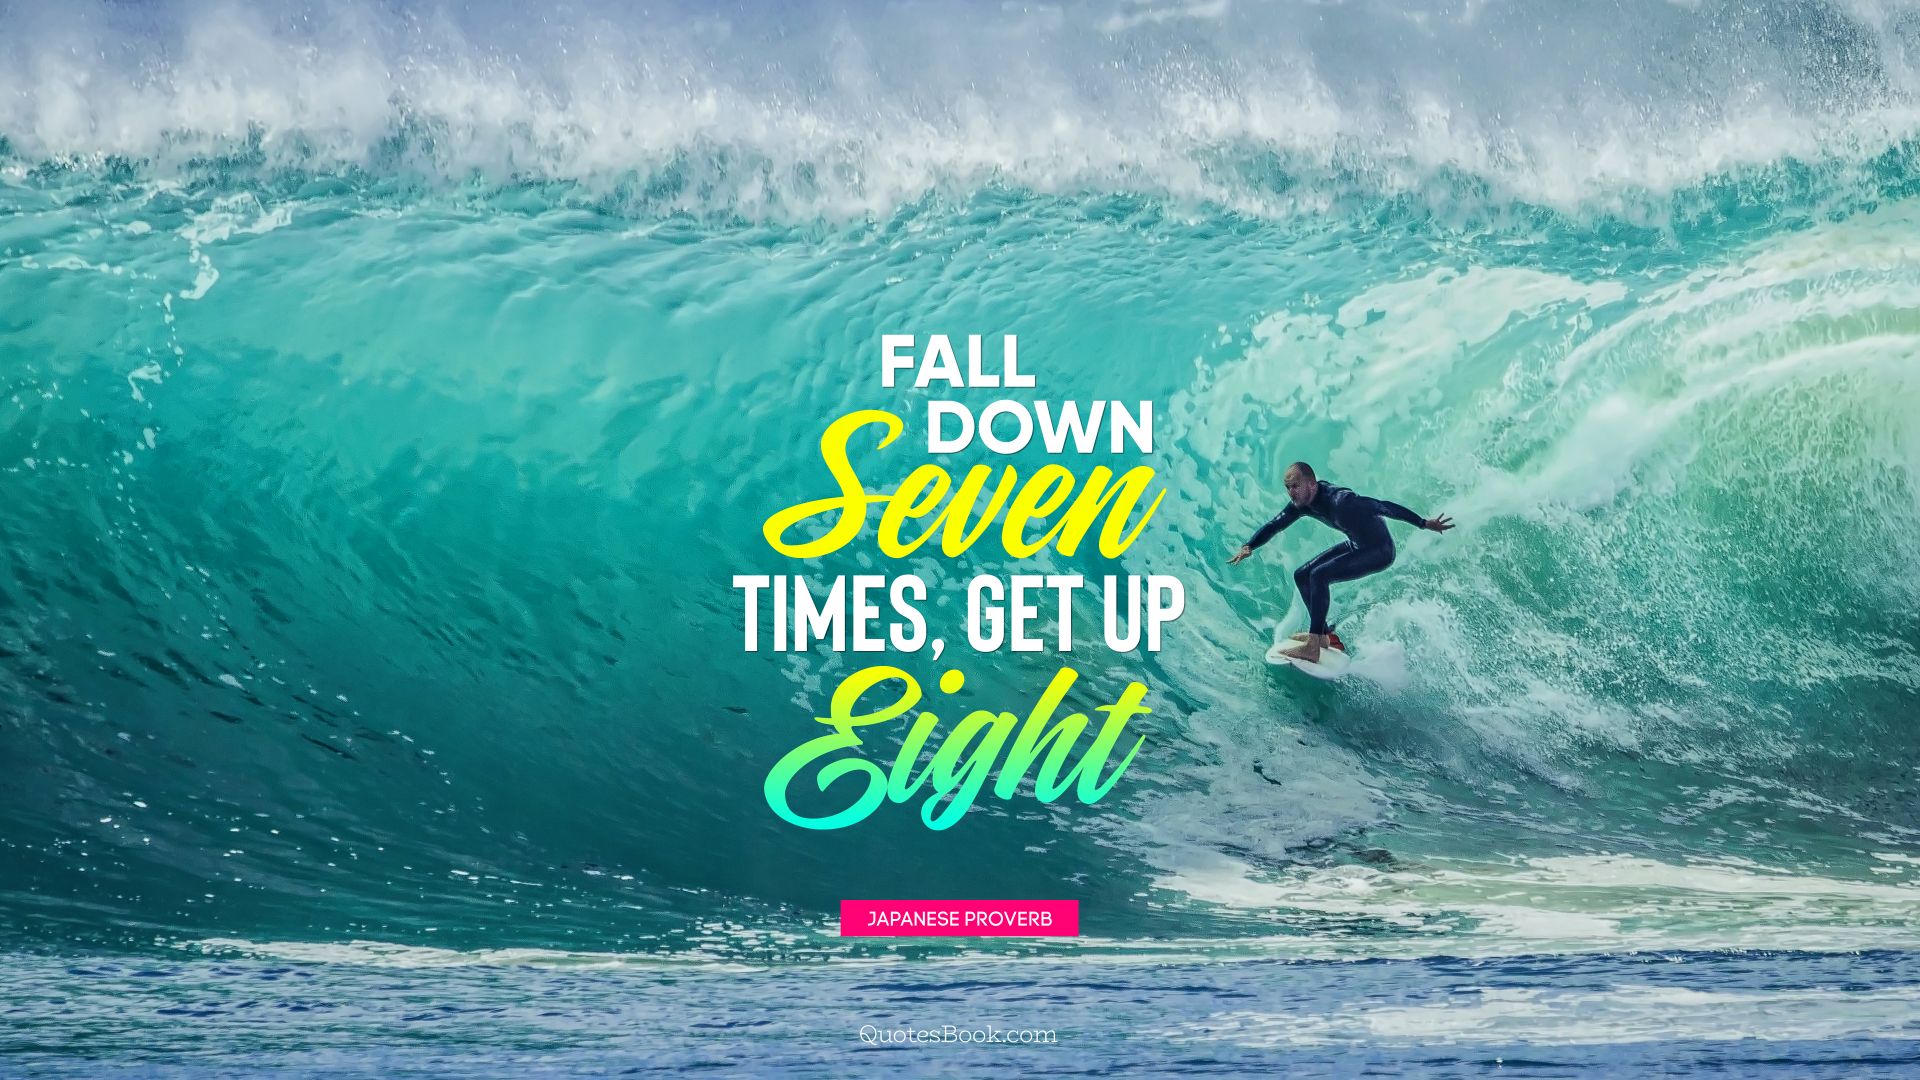 Fall down seven times, get up eight. - Quote by Japanese Proverb